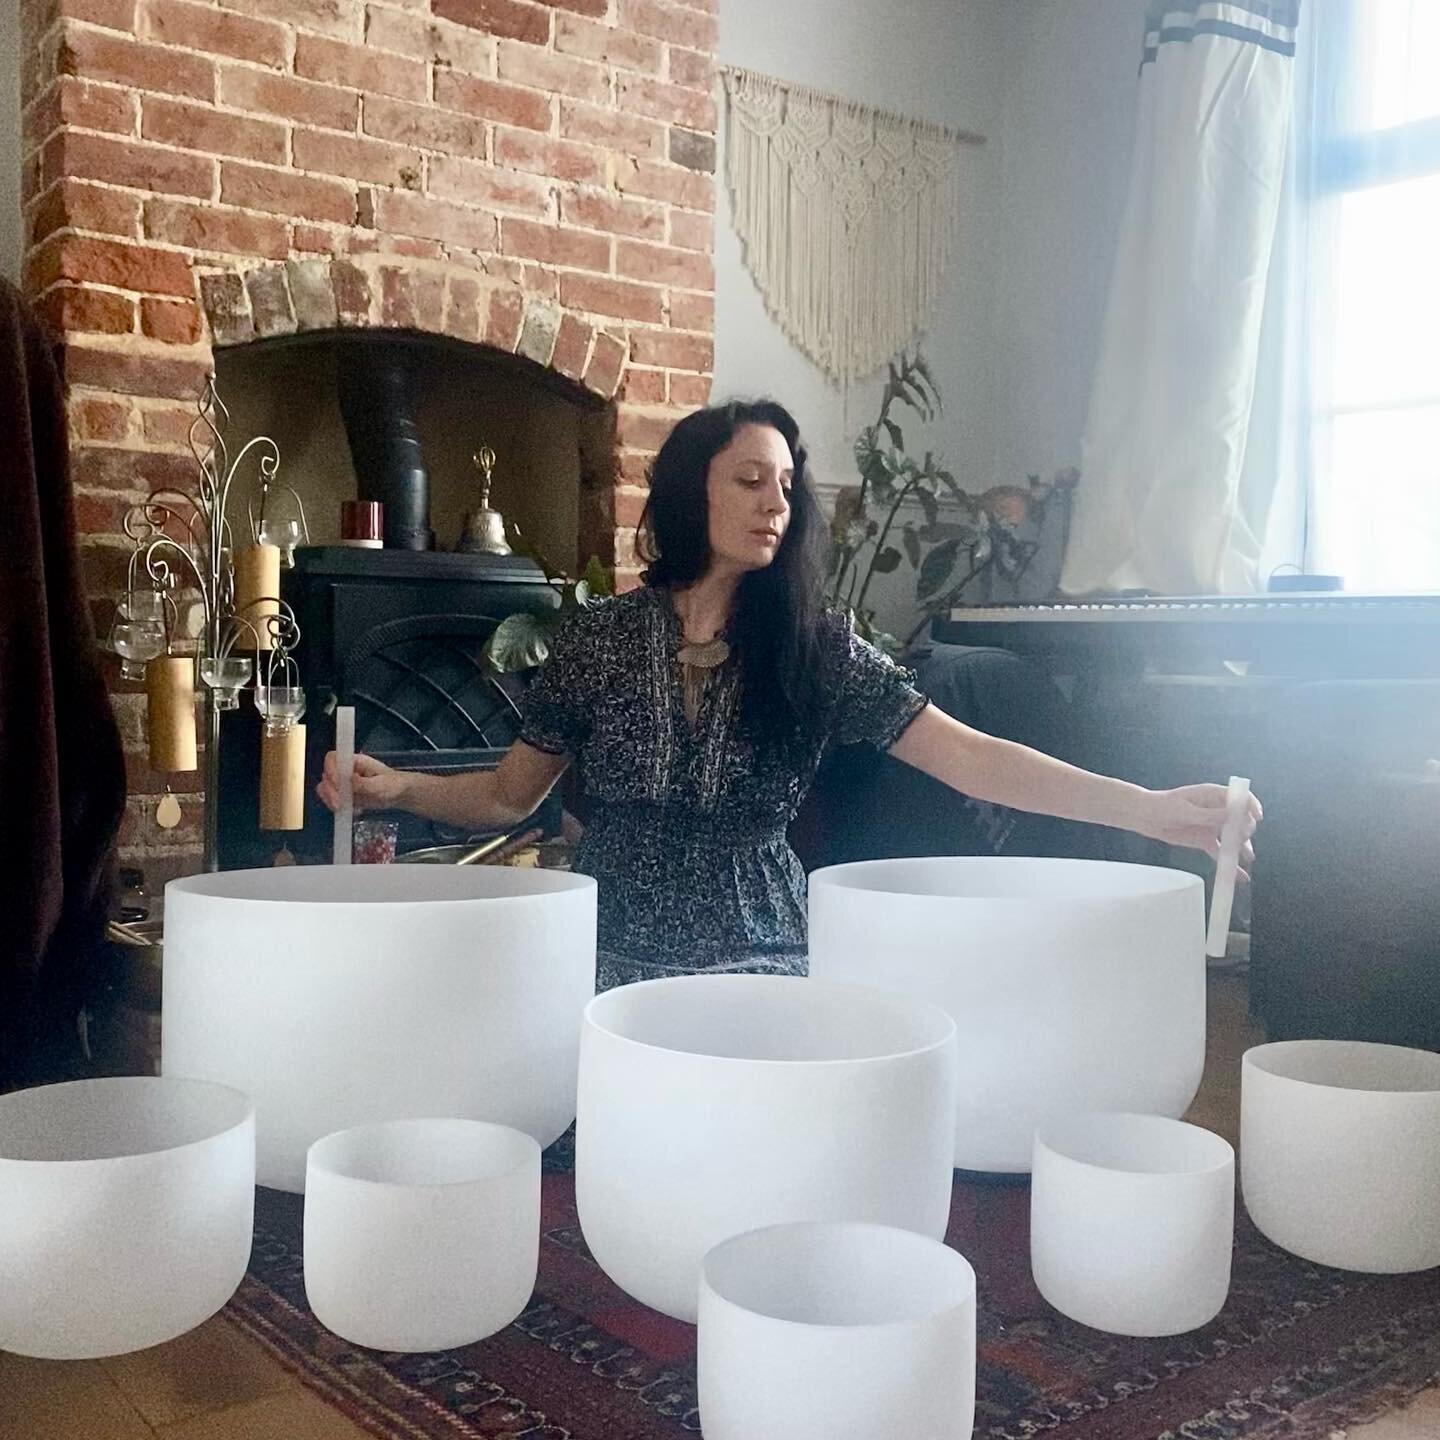 My dreams came true over the weekend with a trip to Reading to collect my beloved 14 + 18 inch crystal singing bowls. 🤍 I have been searching the UK for these as they have an incredibly powerful deep long lasting resonance. 

I thought I&rsquo;d mak